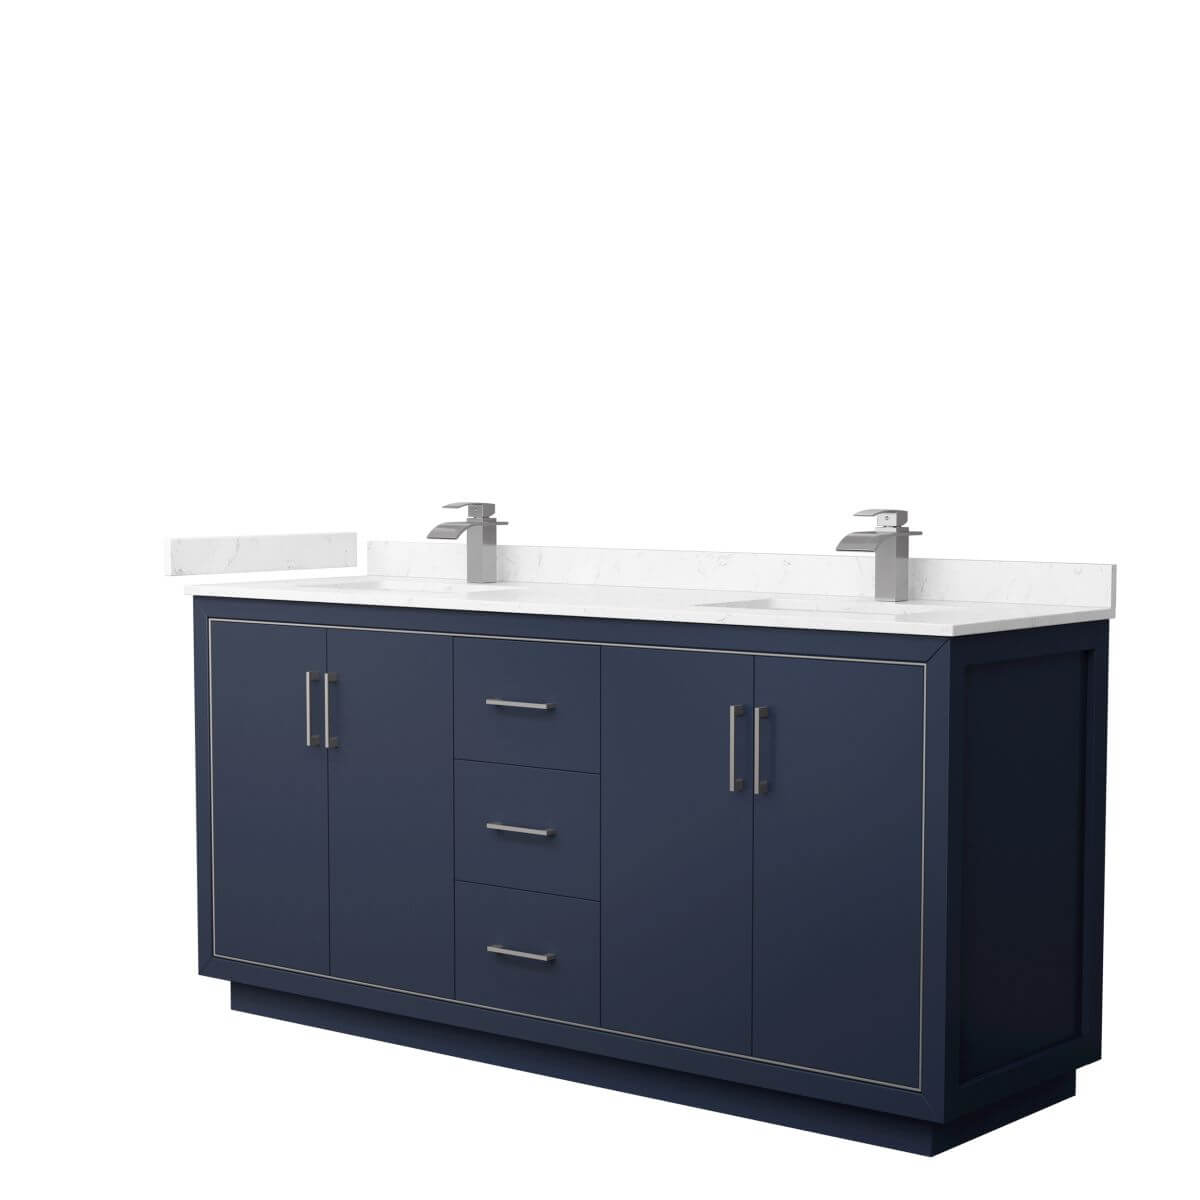 Wyndham Collection WCF111172DBNC2UNSMXX Icon 72 inch Double Bathroom Vanity in Dark Blue with Carrara Cultured Marble Countertop, Undermount Square Sinks and Brushed Nickel Trim